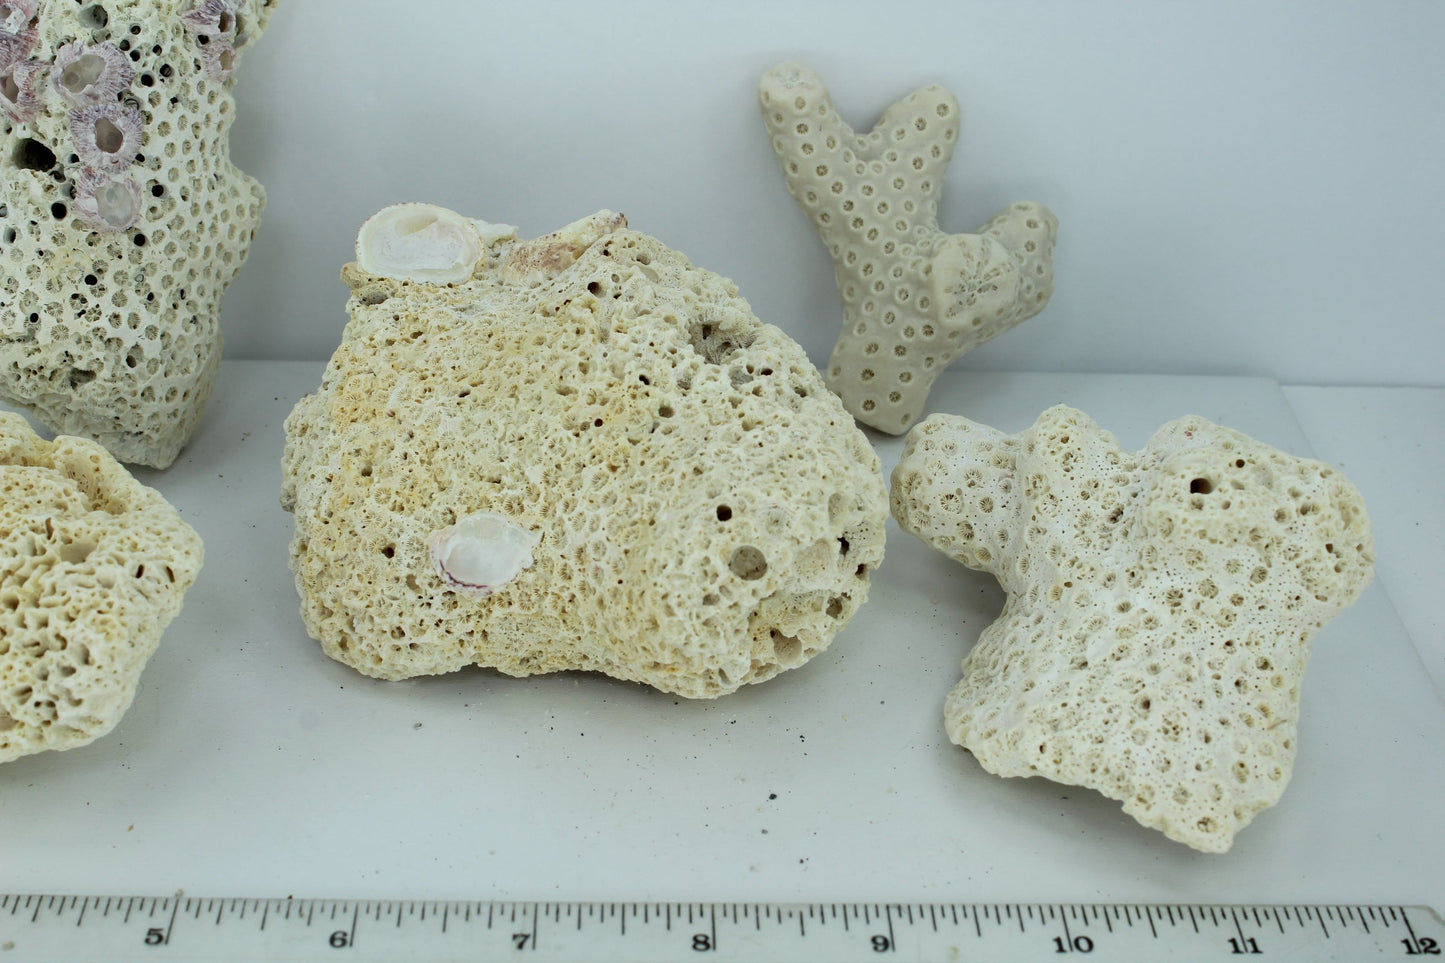 Natural Coral Fossils 6 Unique Pieces 5" to 3" Barnacles Estate Collection Aquarium Shell Art Collectibles different